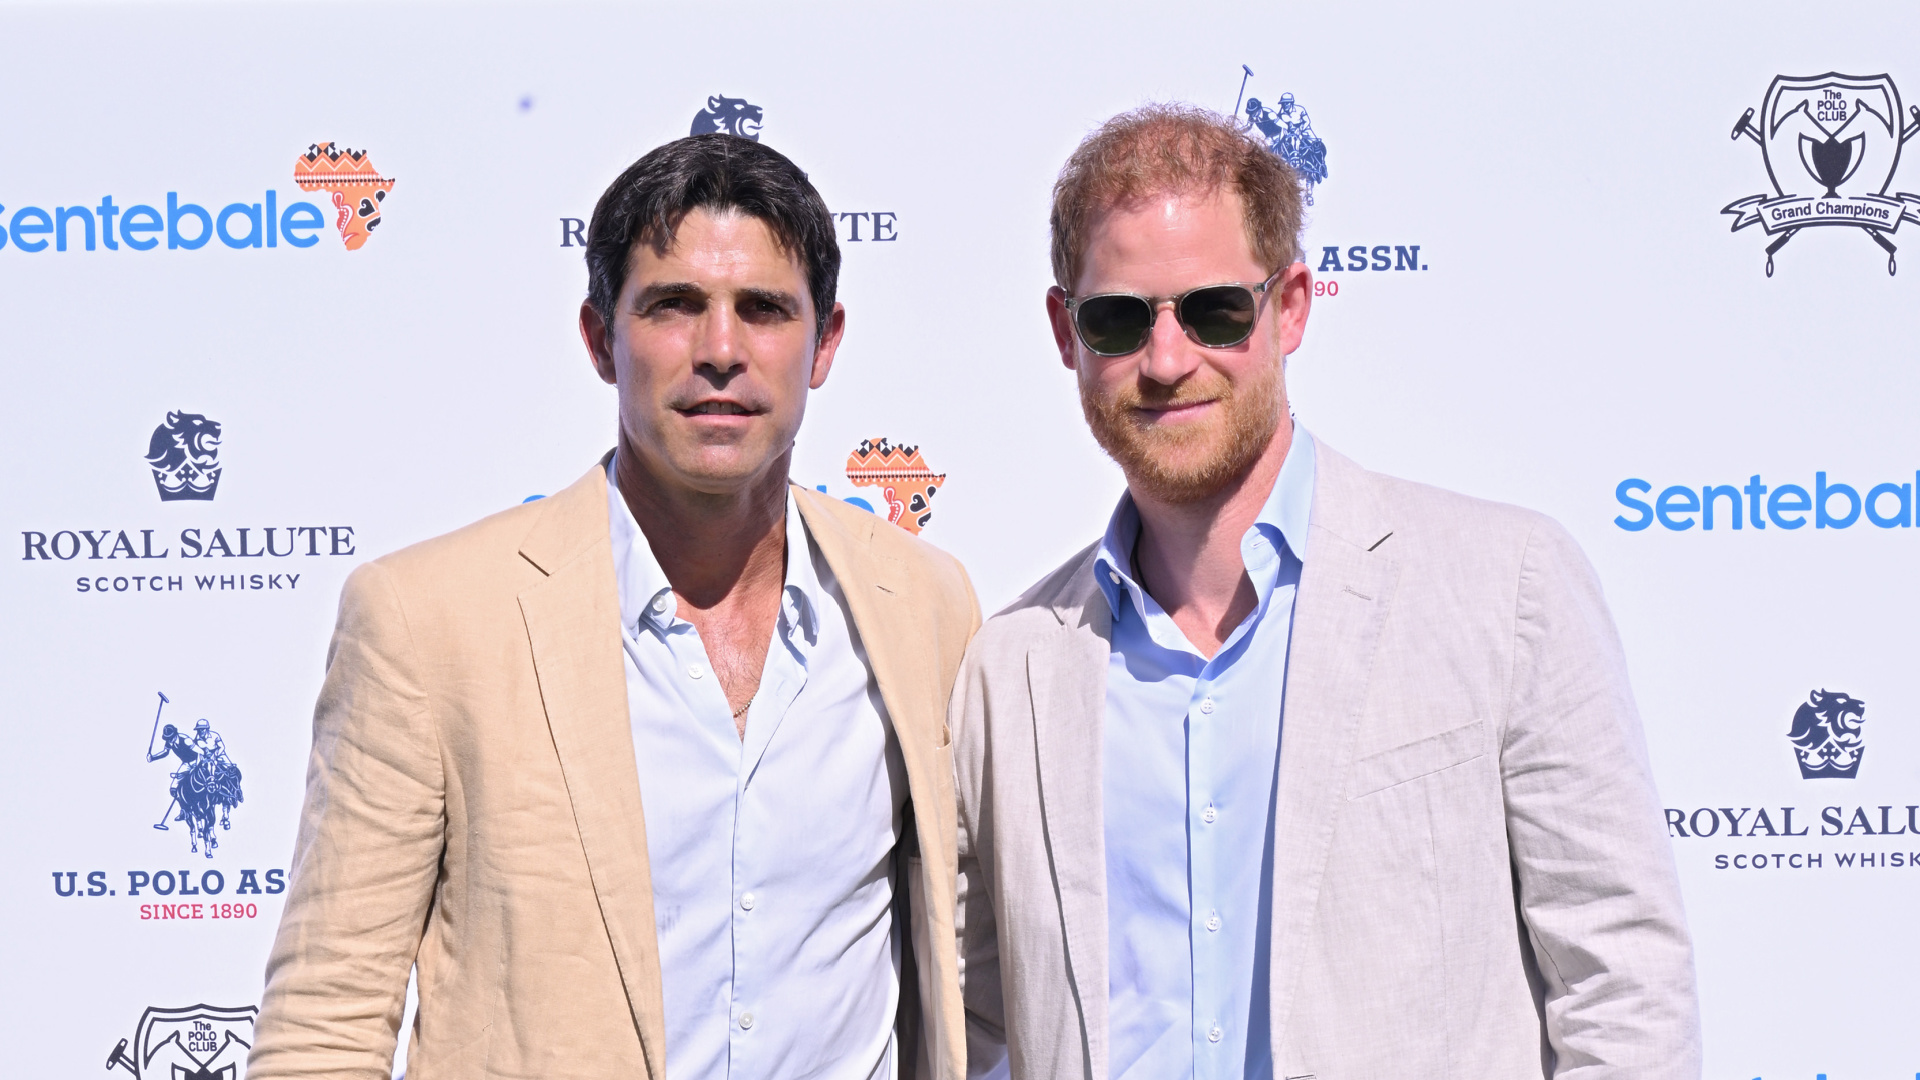 Prince Harry & Polo: all we know about the Duke & Duchess of Sussex's new Netflix shows